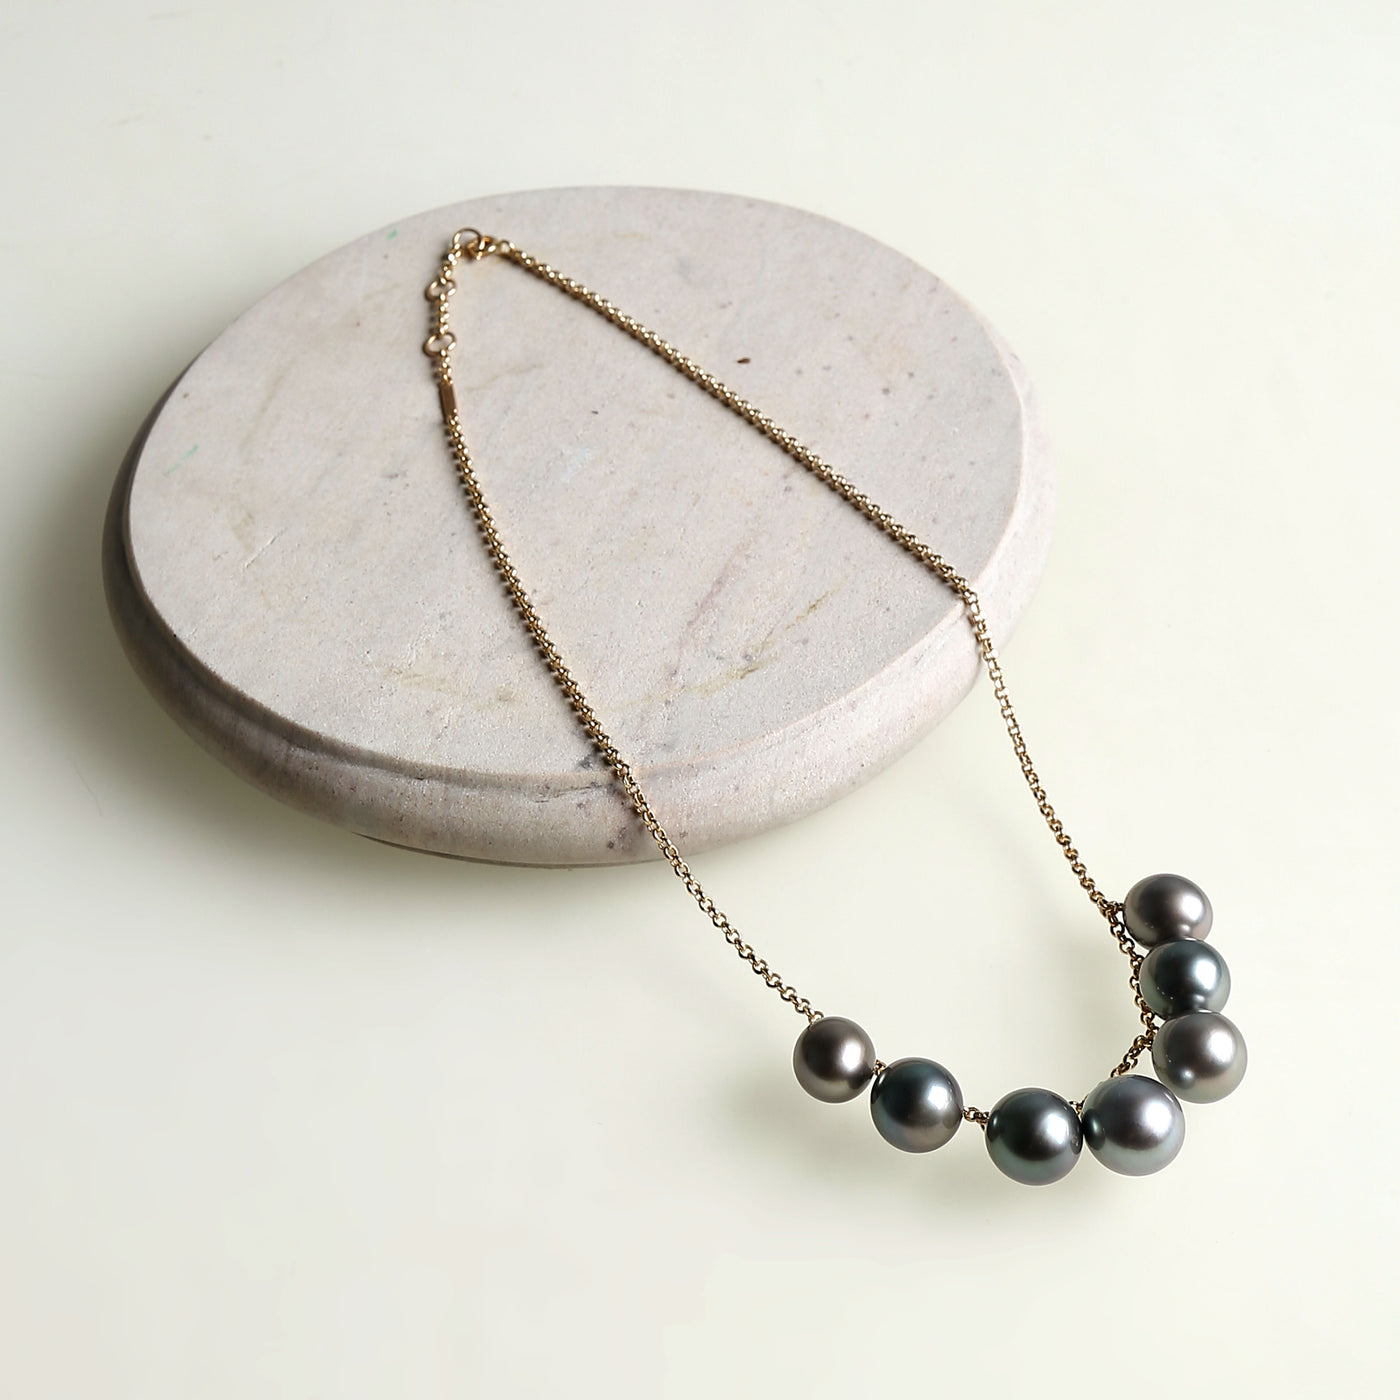 Tahiti Pearl Necklace from The Line 